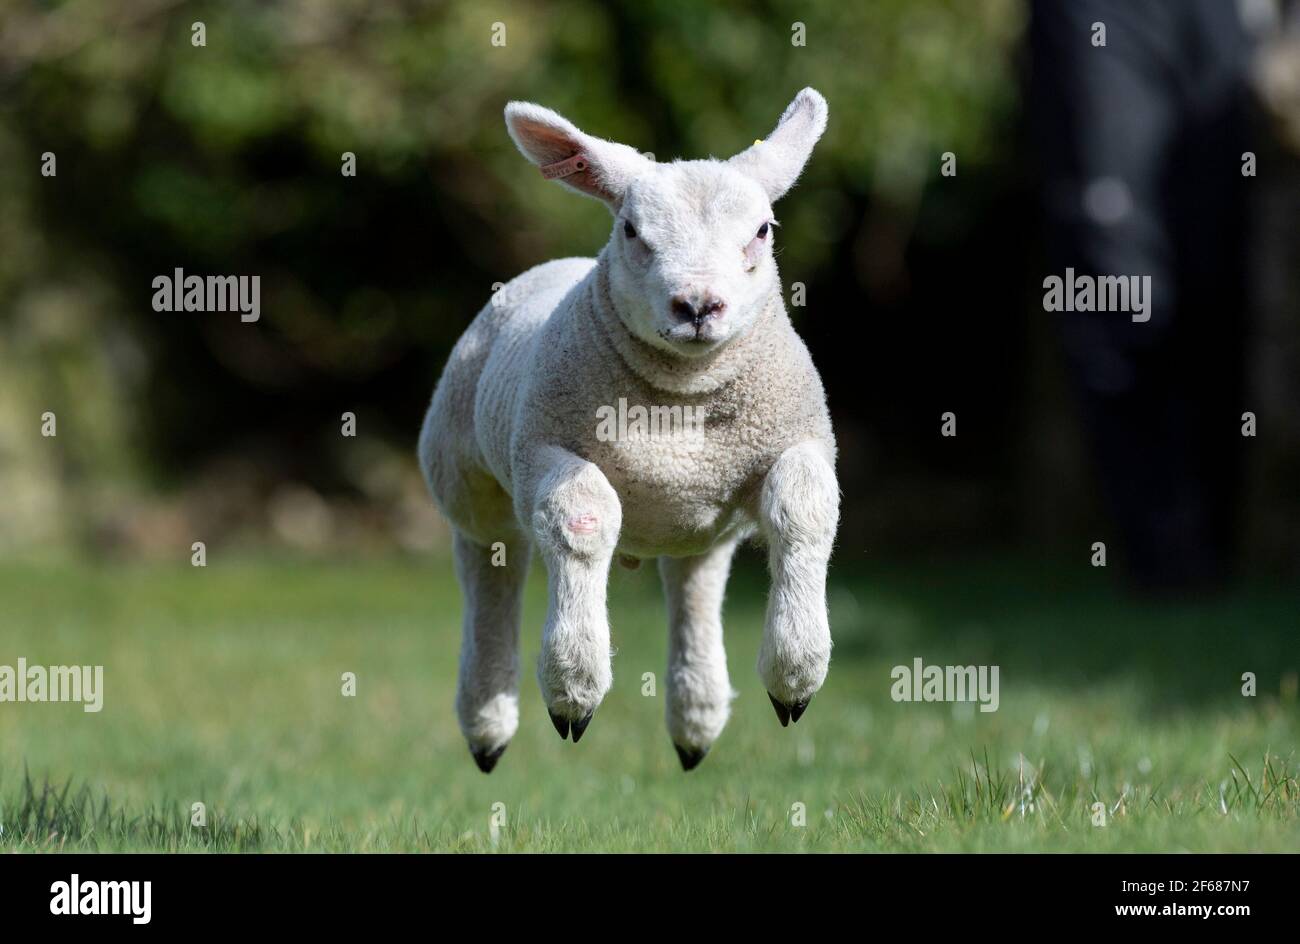 Hawes, North Yorkshire, UK. 30th Mar, 2021. Thumper the flying texel pet lamb has a spring in its step as the sun shines down after Credit: Wayne HUTCHINSON/Alamy Live News Stock Photo